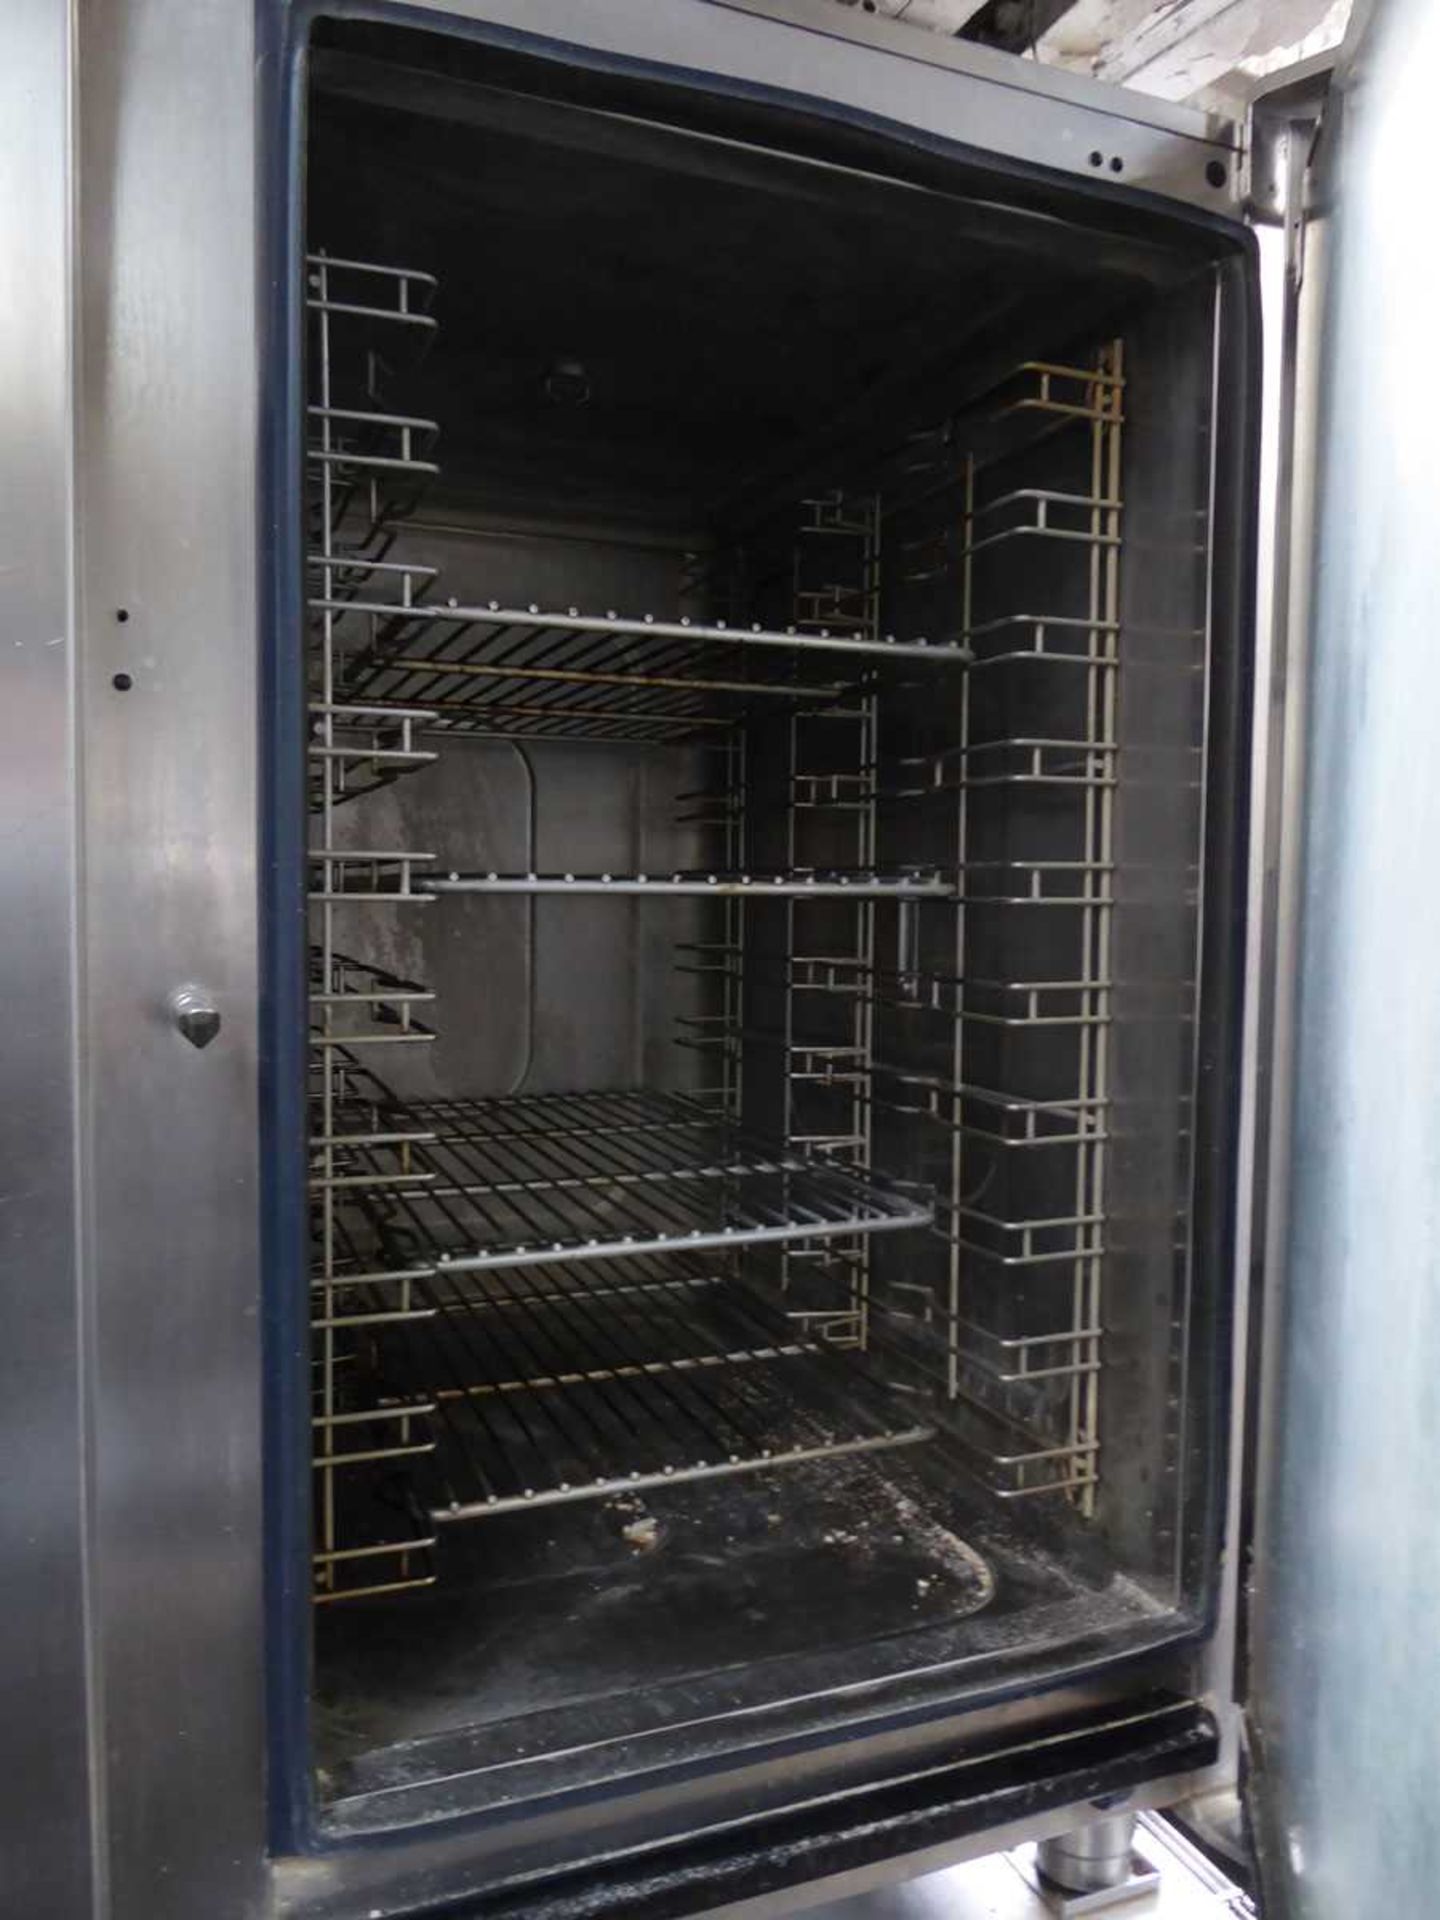 93cm gas Angelo Po Combistar BX G20 10 grid combination oven on stand - Image 2 of 2